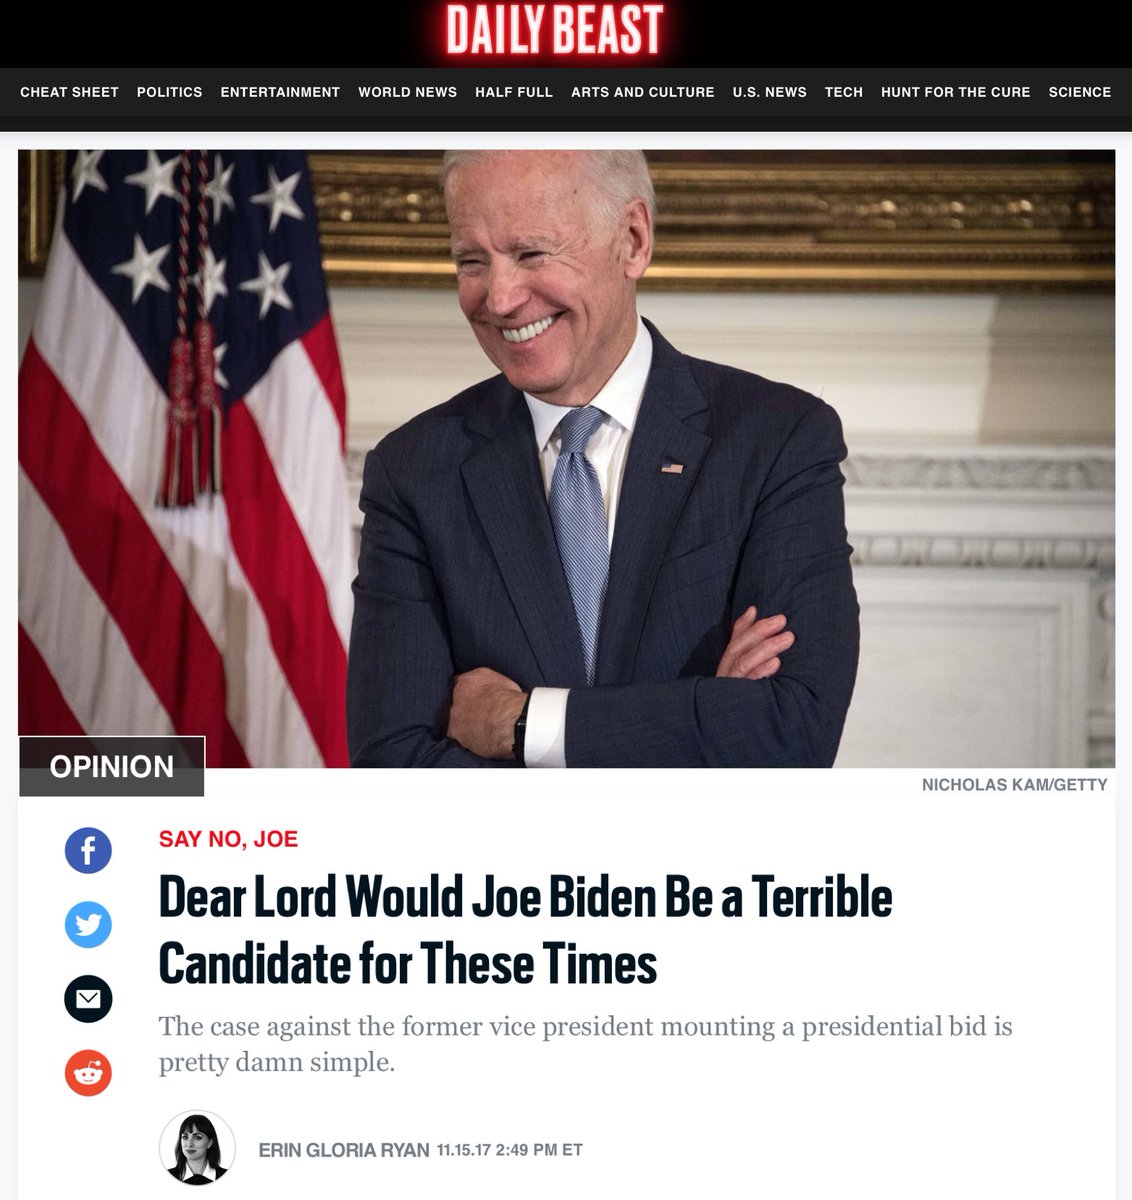 Biden has been allowed to be an openly racist, serial harasser -- FOR YEARS -- with complete protection from the media. Now he's talking about possibly running for president in 2020.The media (that's allowed) is trying to warn you again.It's time to break the cycle.(END)